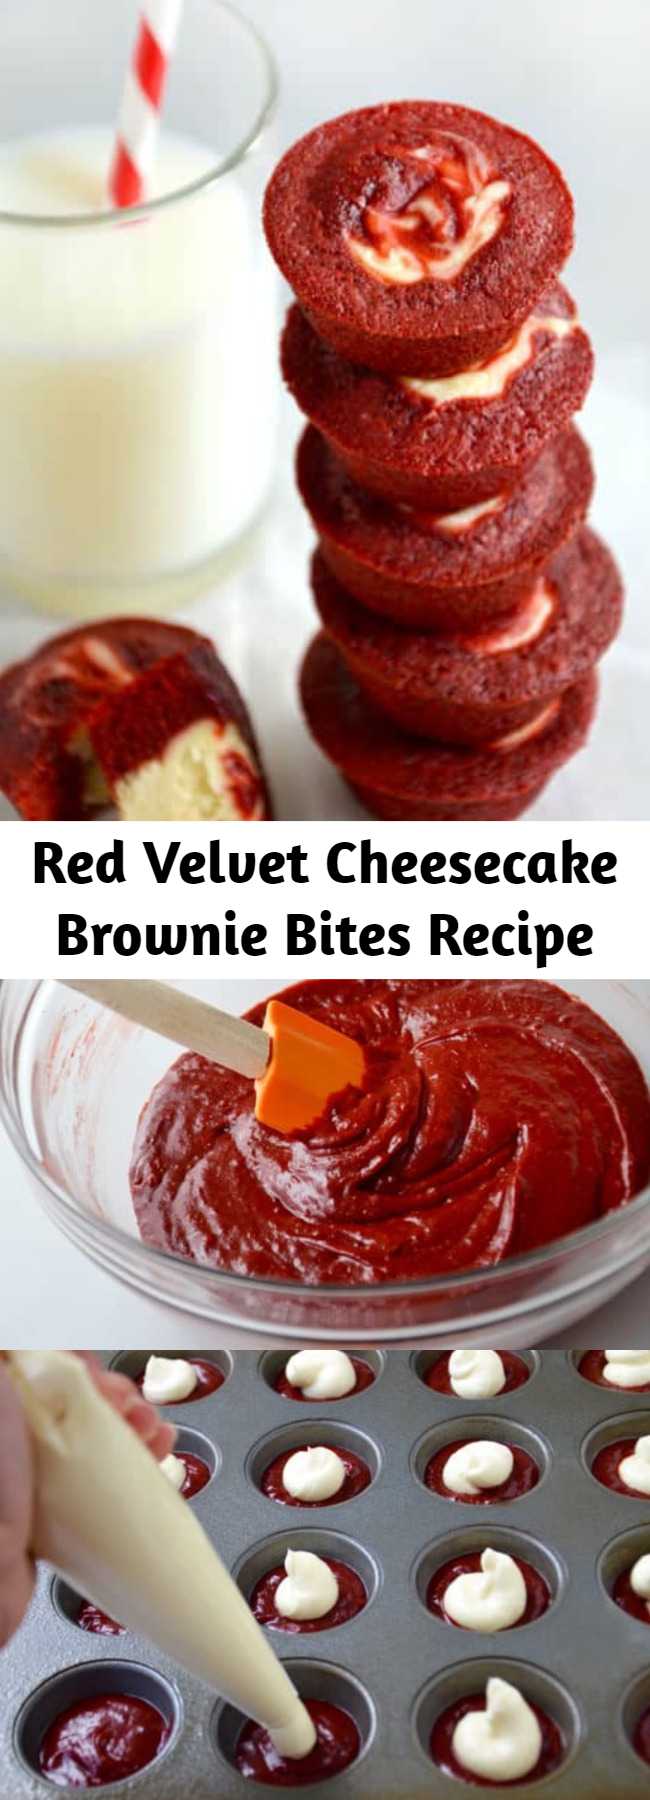 Red Velvet Cheesecake Brownie Bites Recipe - Welcome to the sweet snack-size soiree, Red Velvet Cheesecake Brownie Bites.